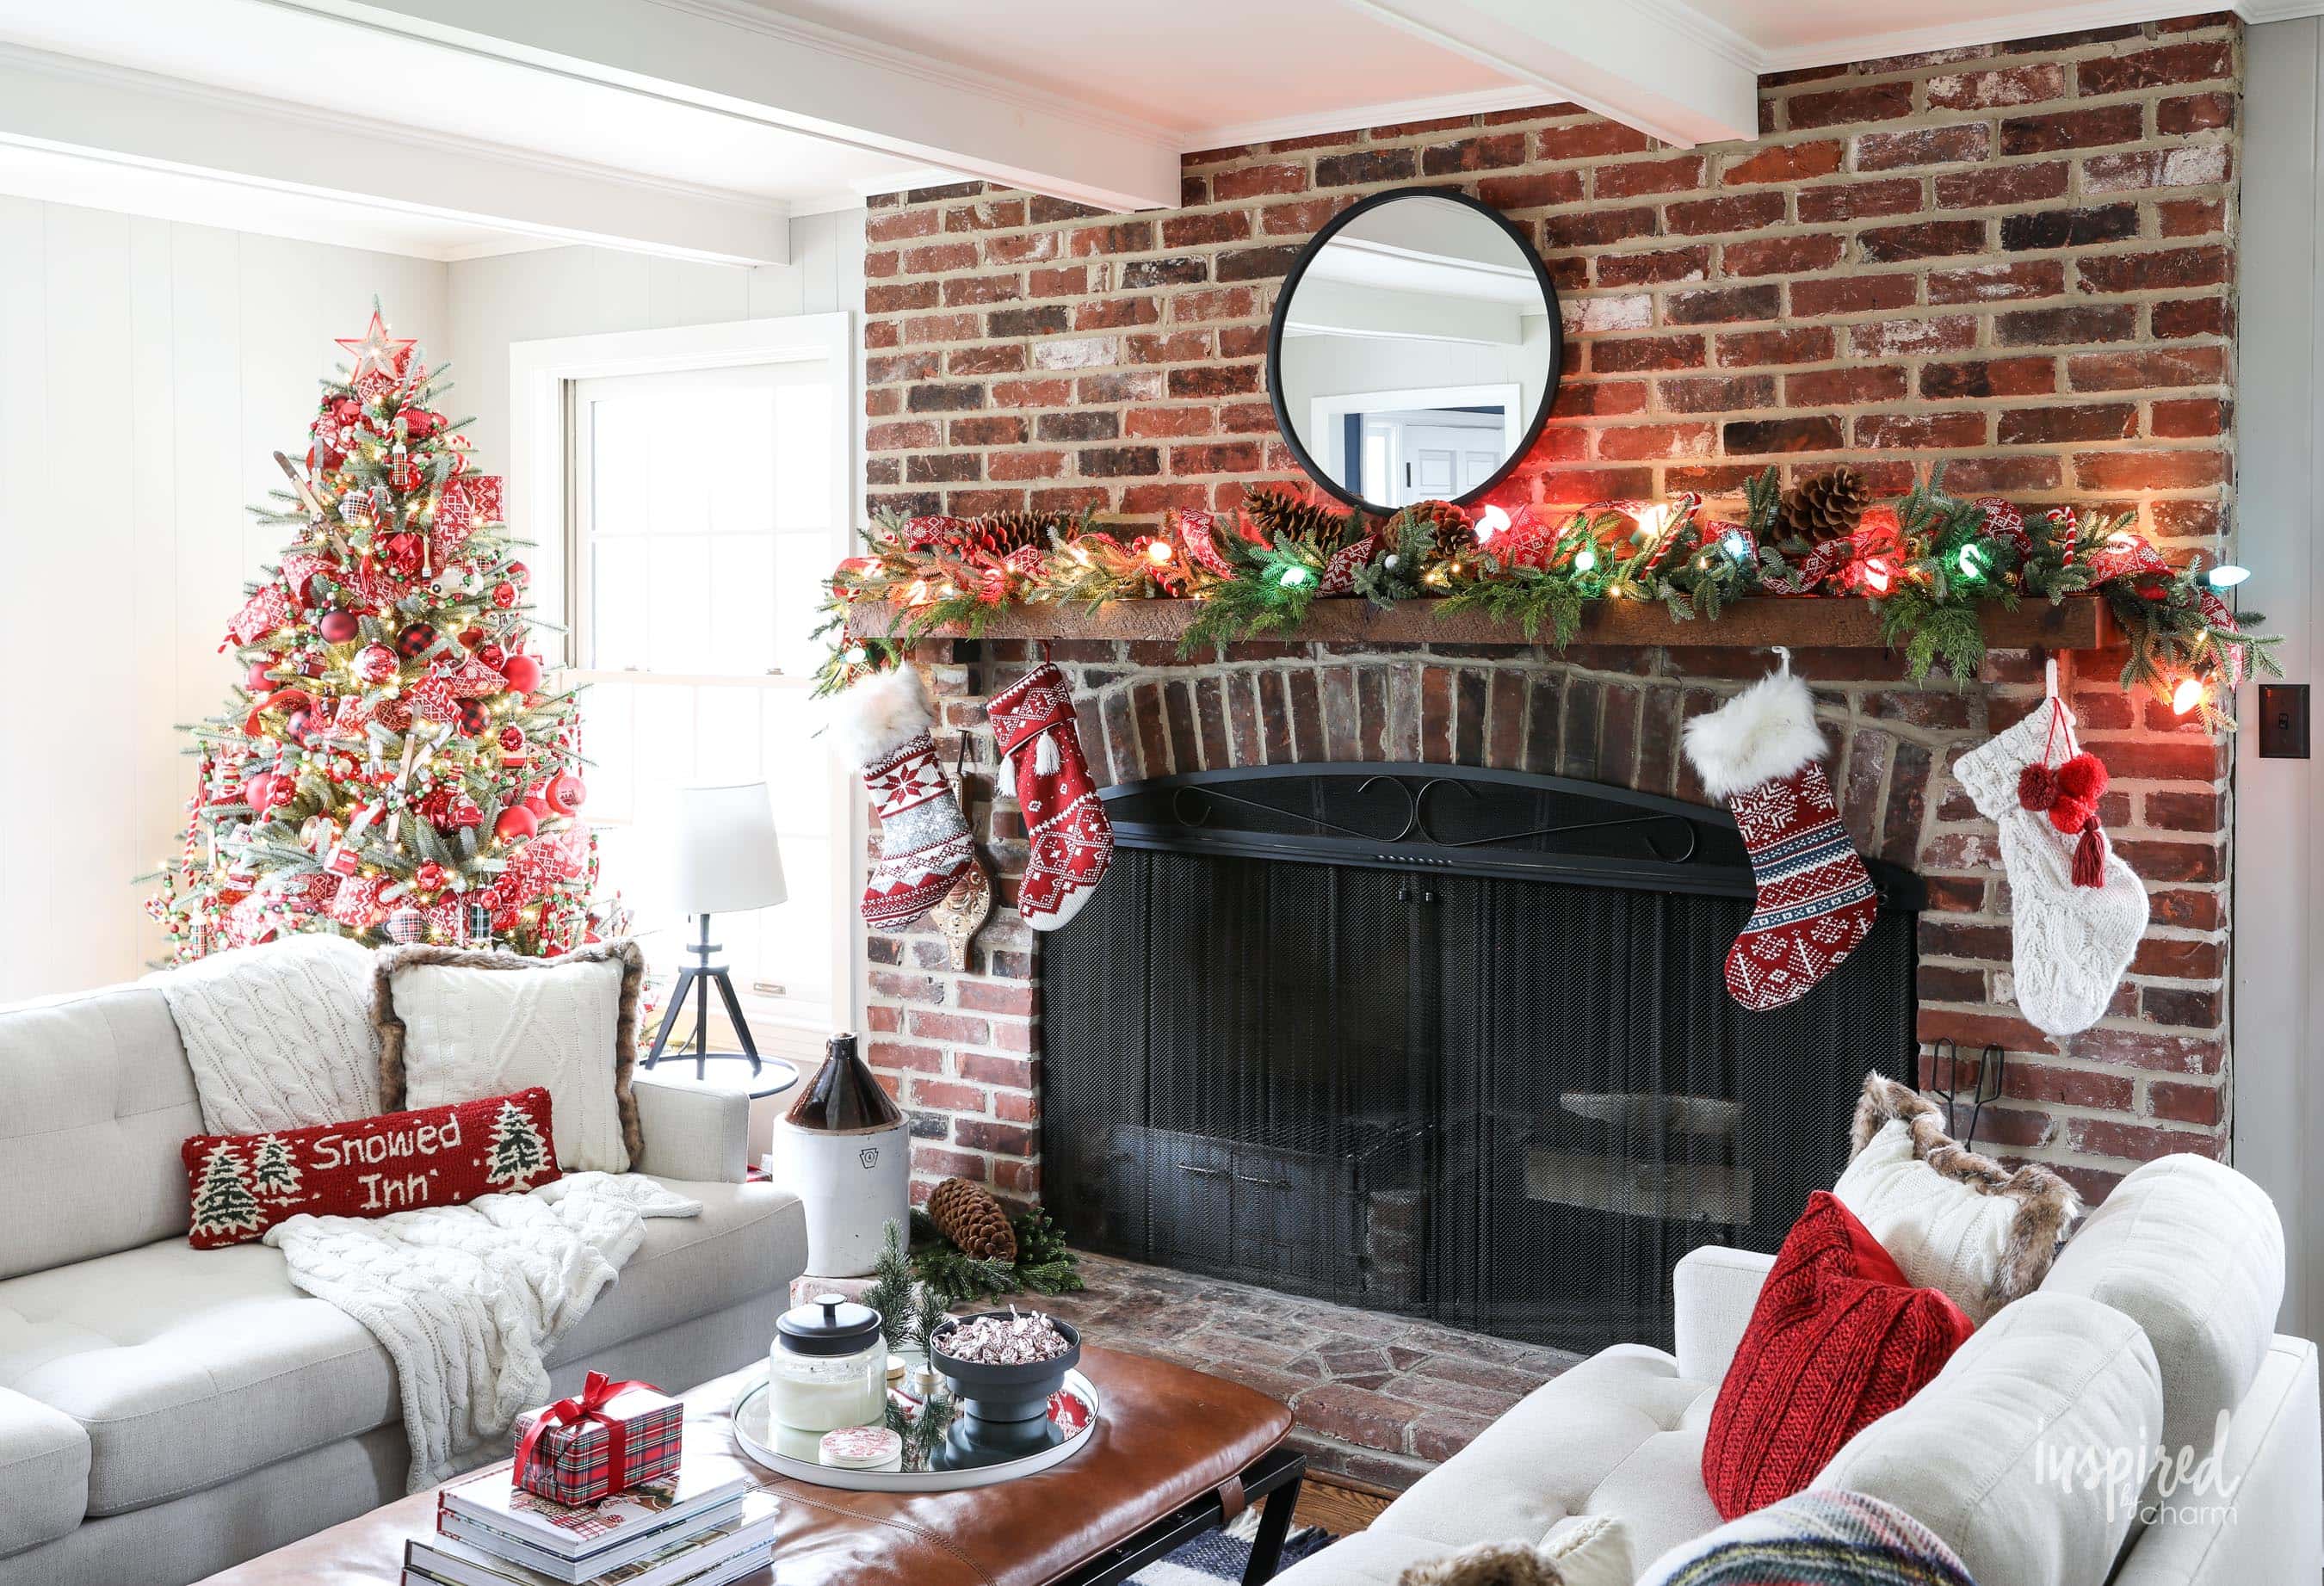 Houston's Most Beautiful (and Intense) Christmas House: 13 Trees, Hundreds  of Owls and Thousands of Ornaments Make This Power Couple's Manse Stand Out